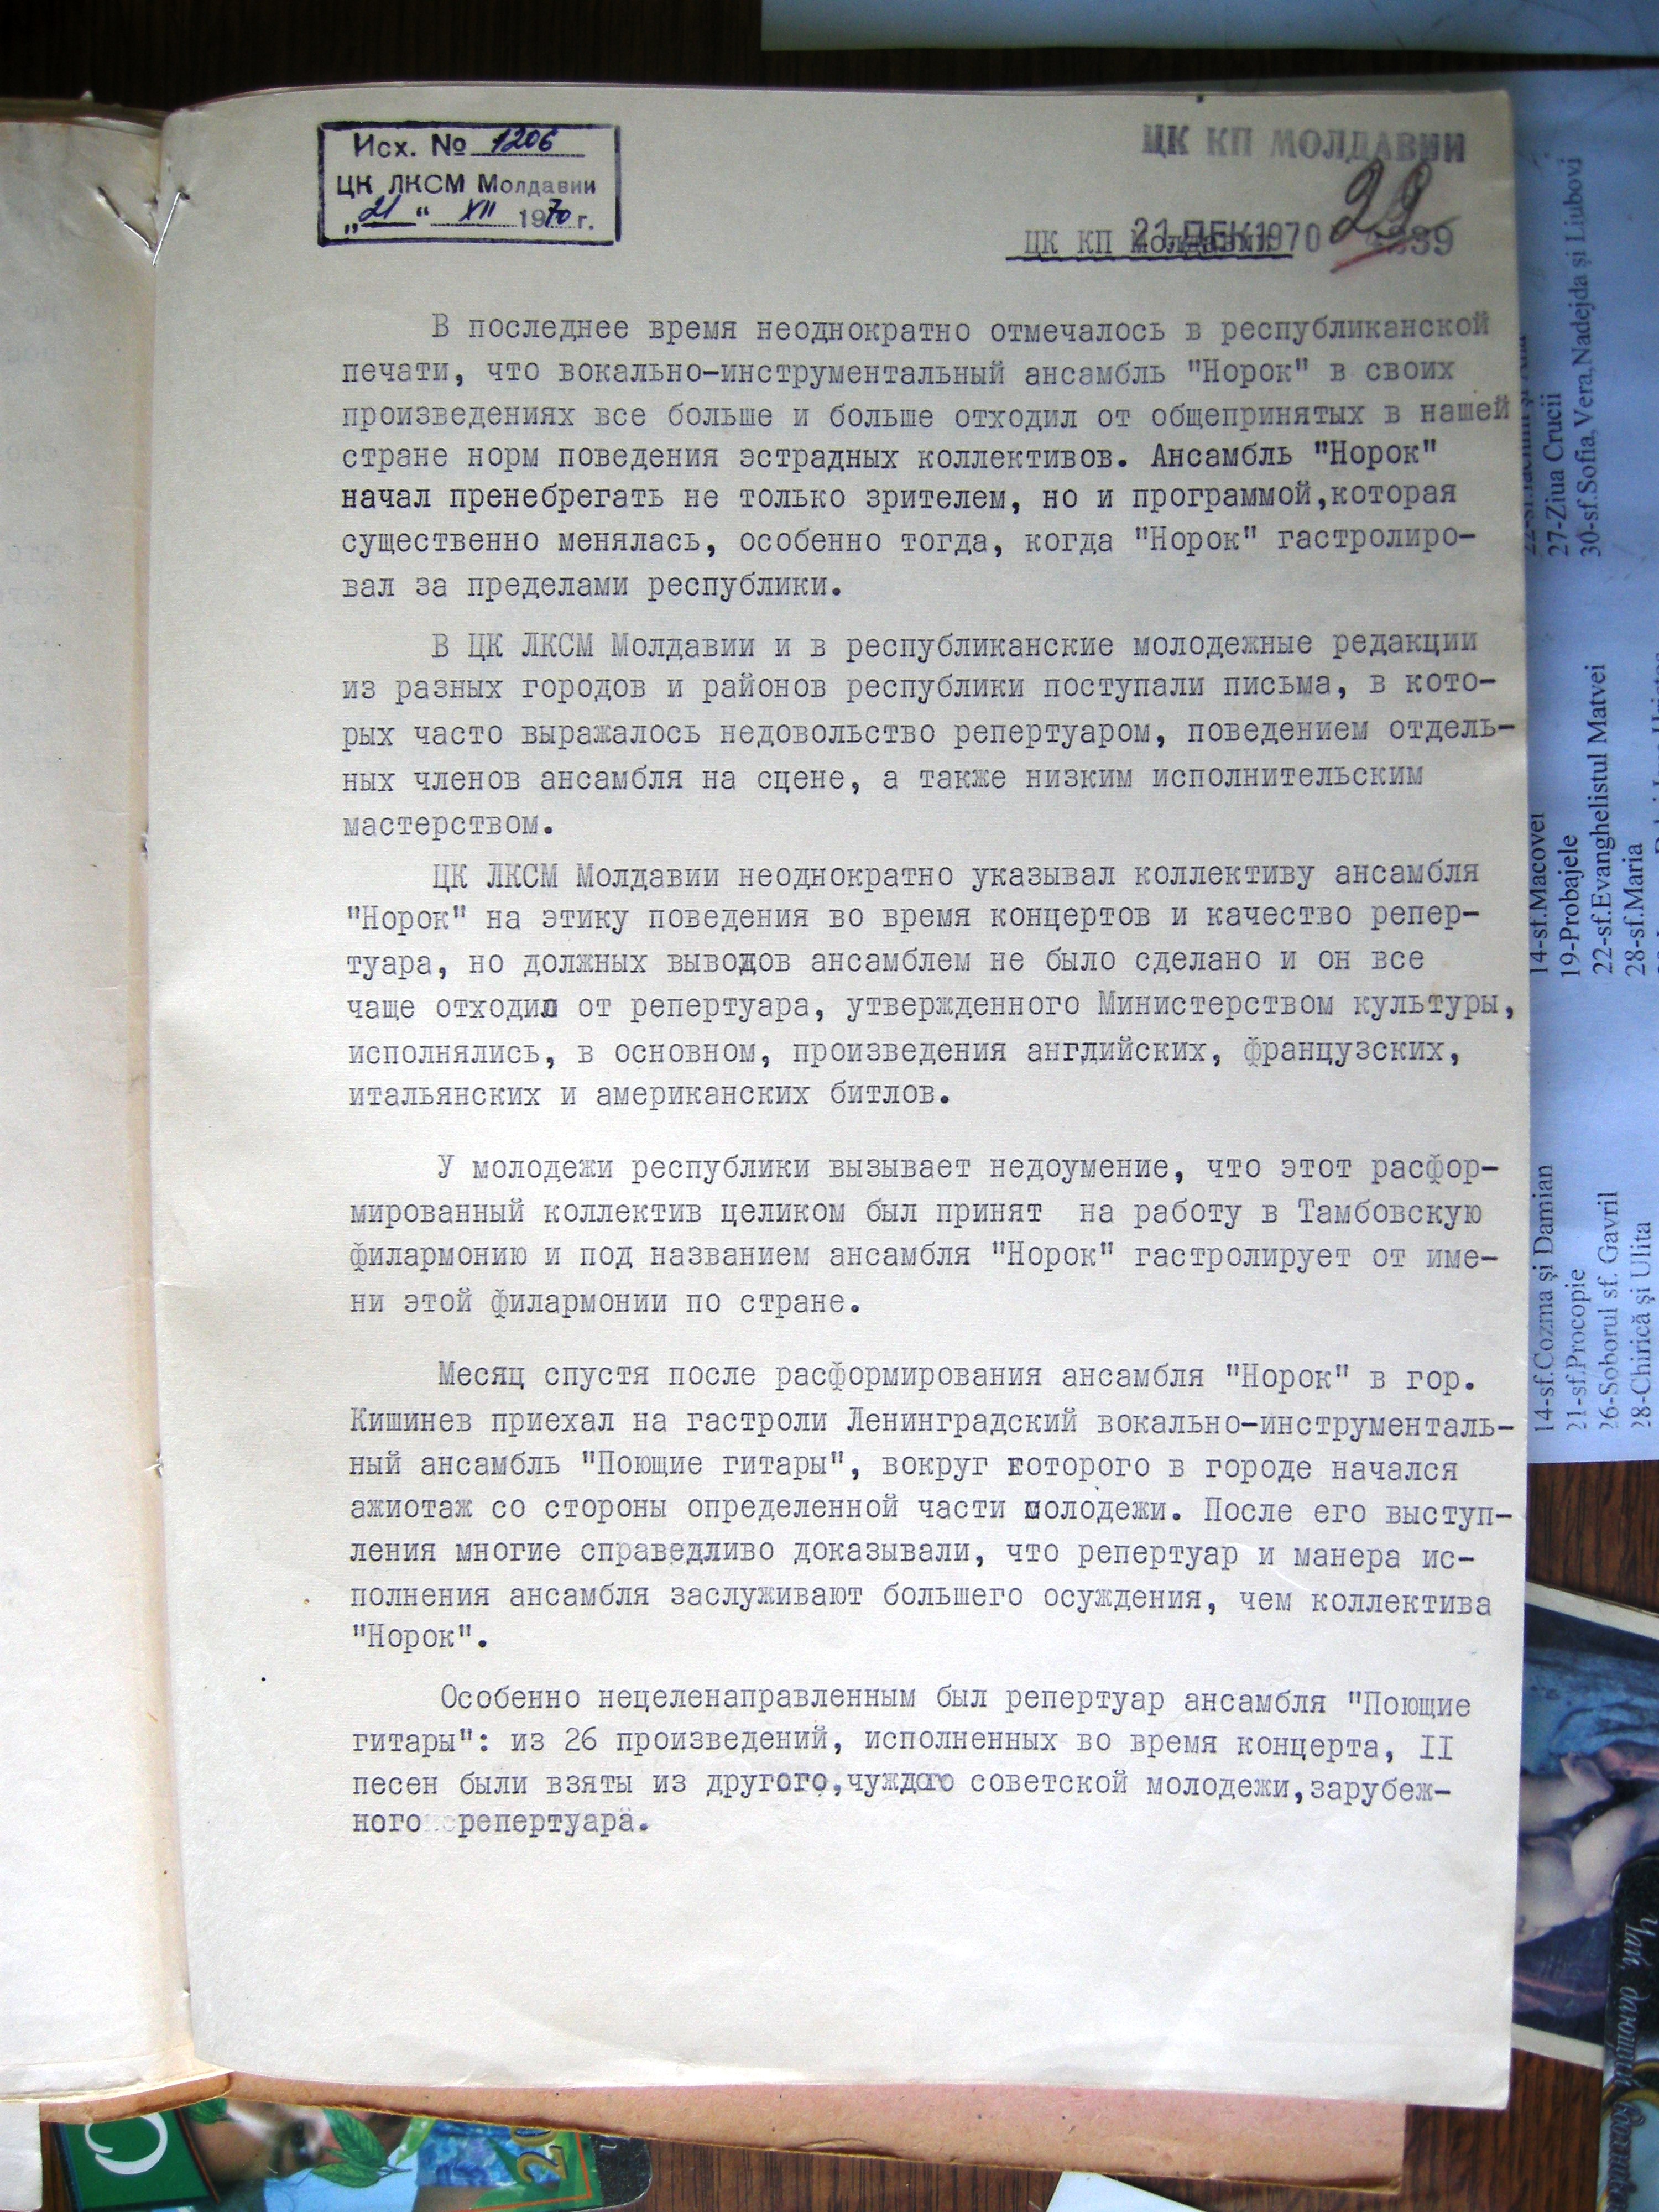 First page pf Petru Lucinschi's letter to the Central Committee  of the CPM. 11 December 1970